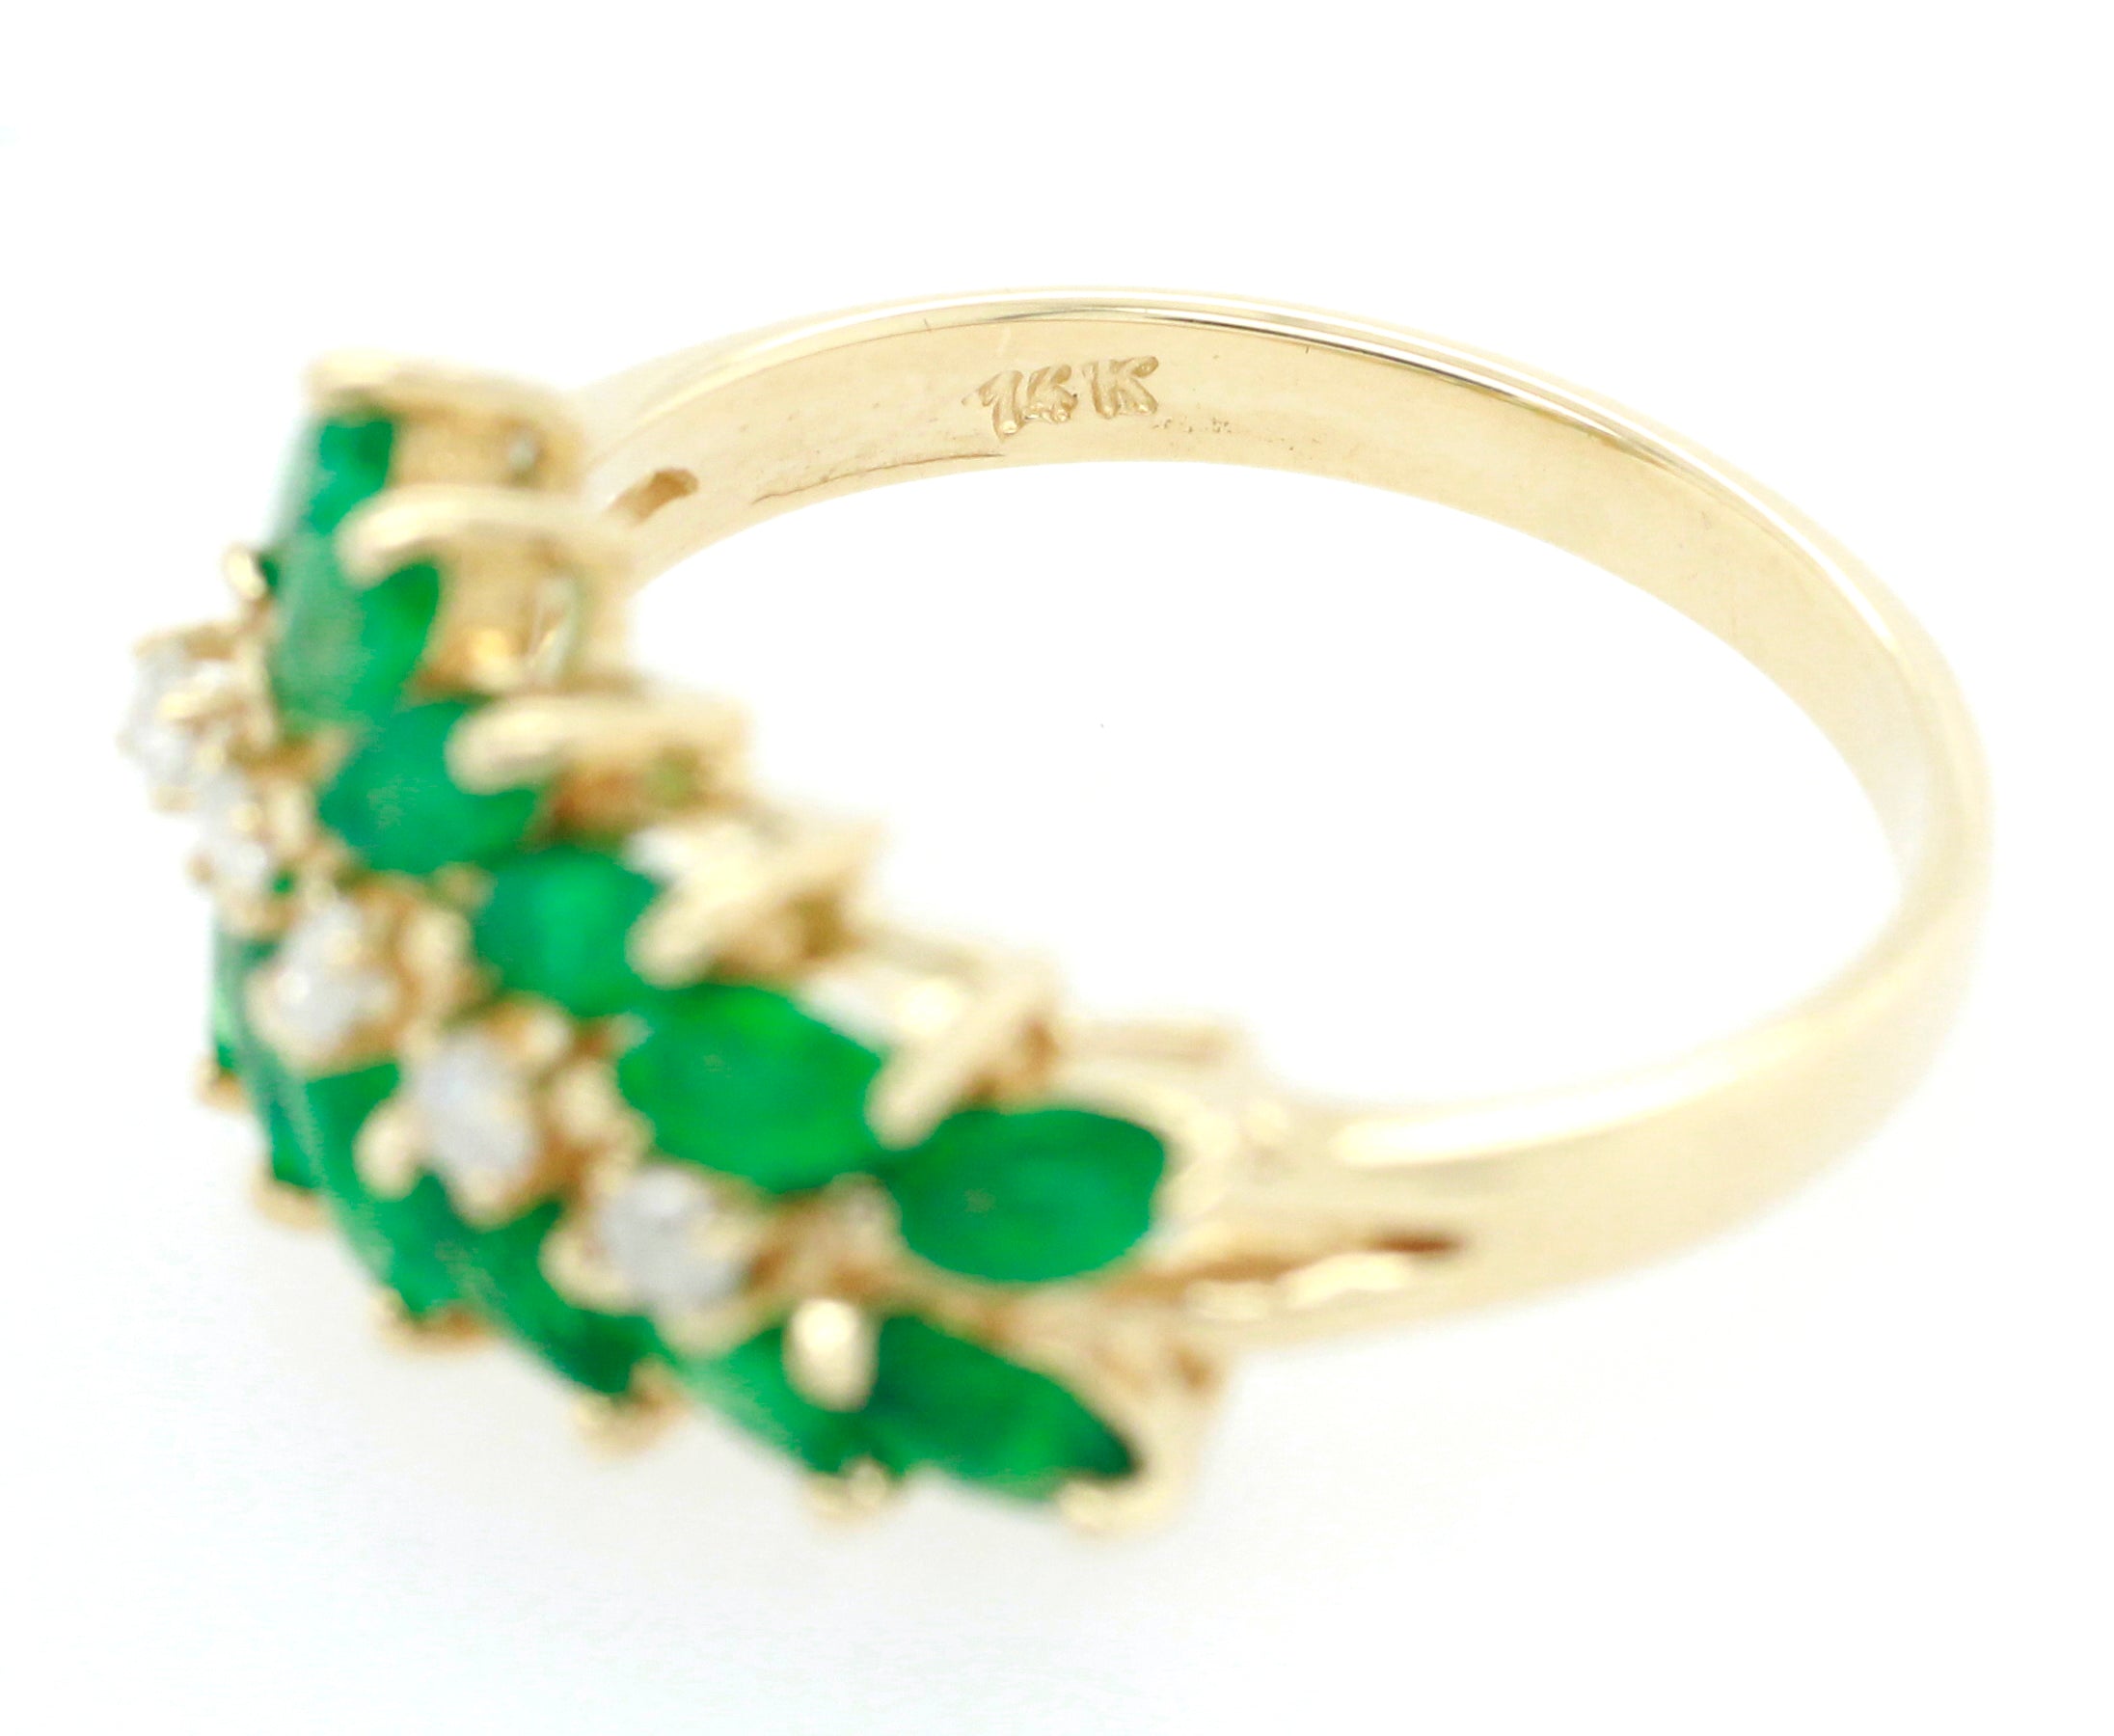 Vintage 0.50ctw Emerald & Diamond Leaf Band Ring in 14k Yellow Gold | Size 6